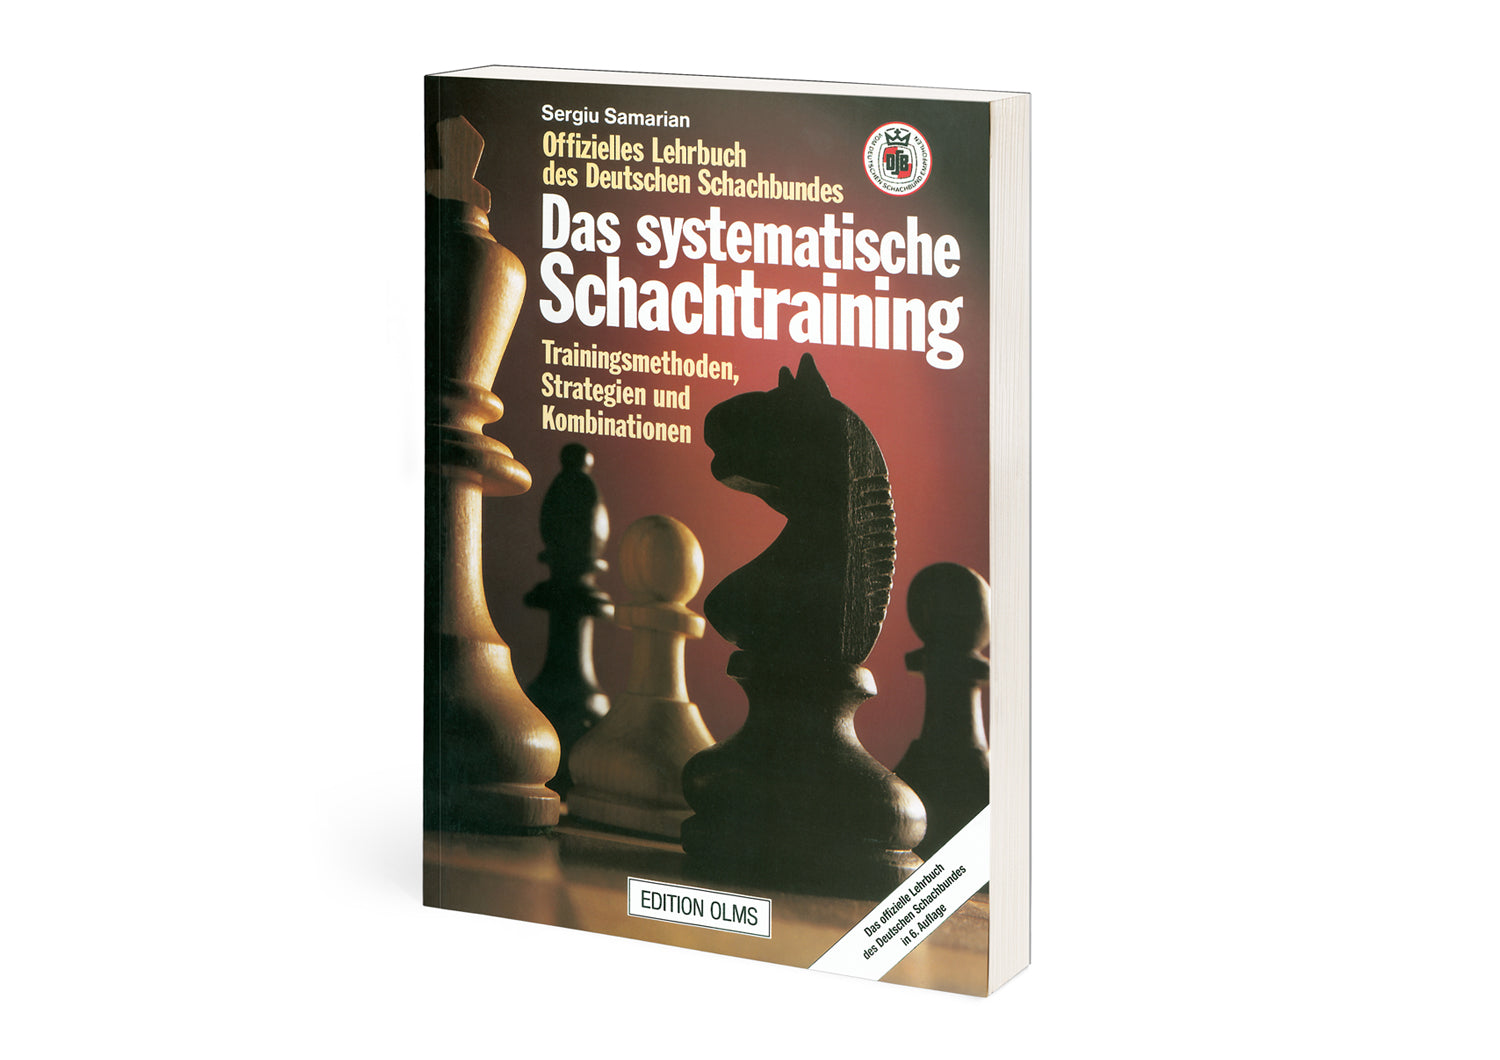 Samarian: Systematic Chess Training - Official Textbook of the German Chess Federation